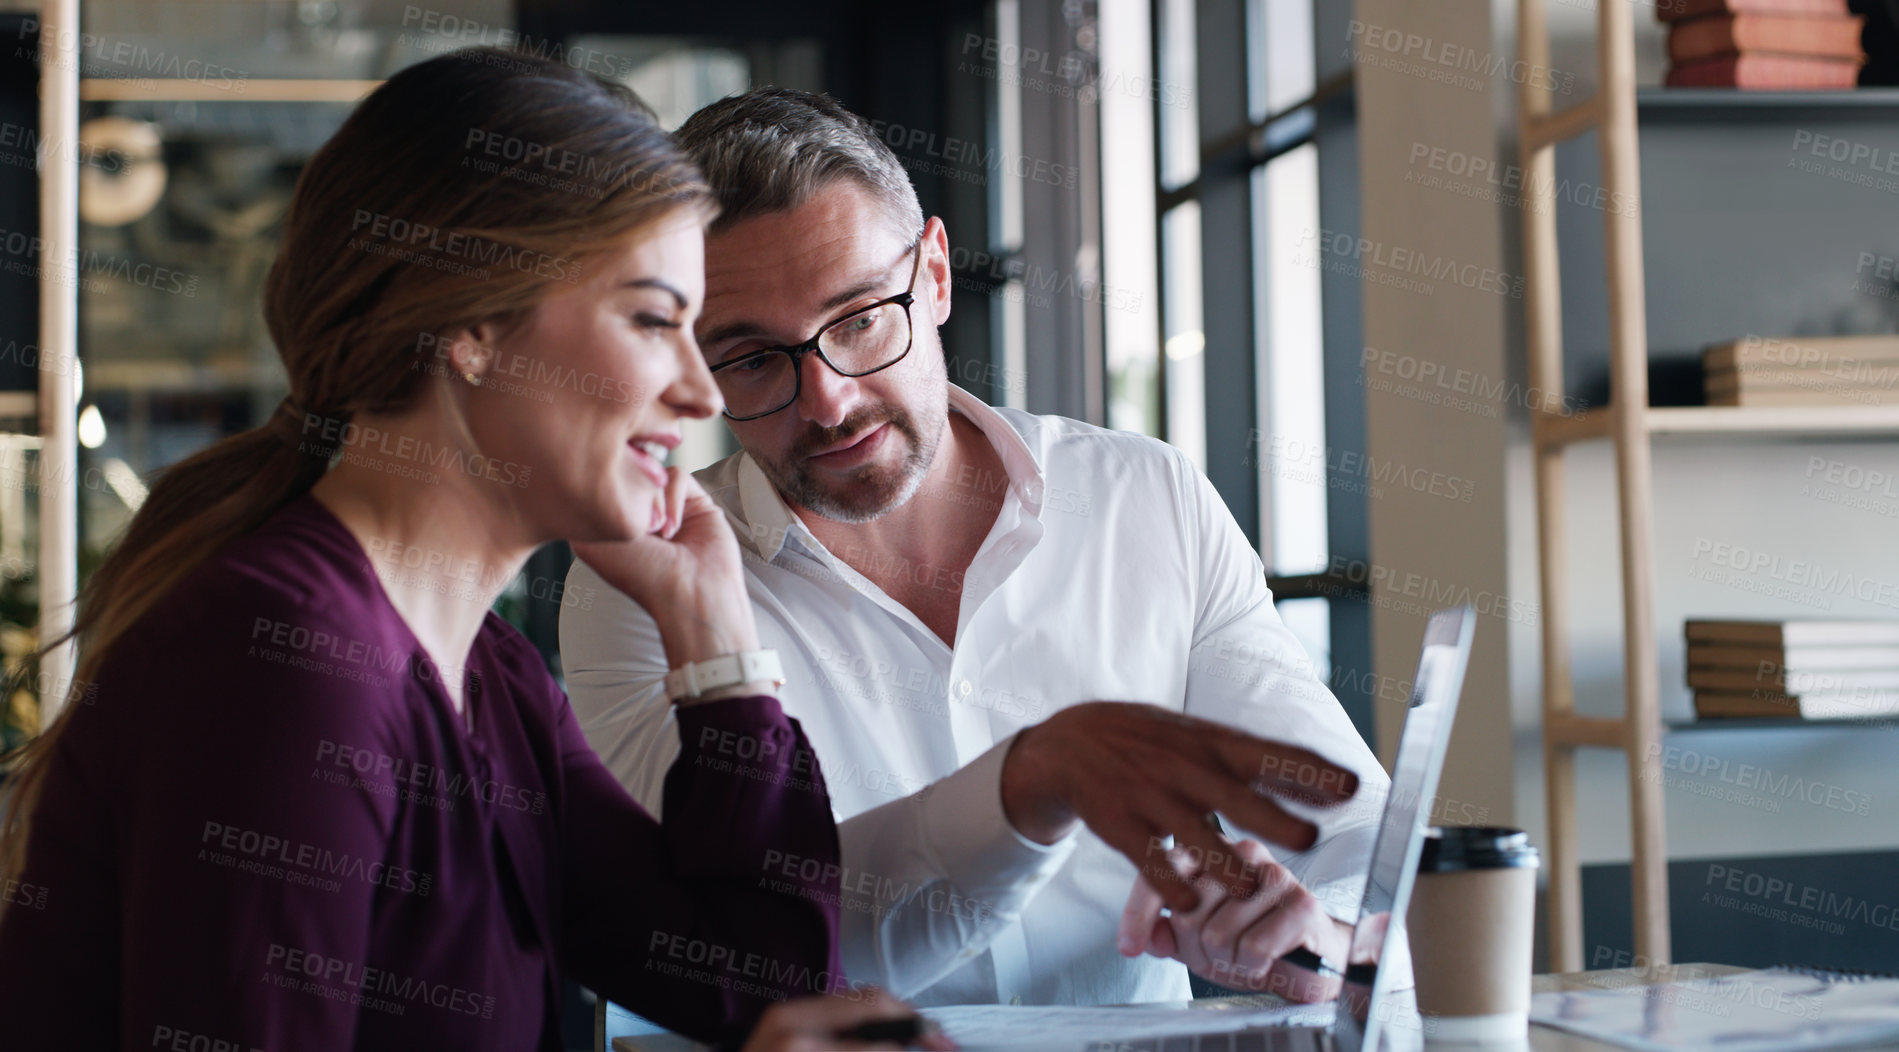 Buy stock photo Shot of a businessman and businesswoman using a laptop and having a discussion in a modern office